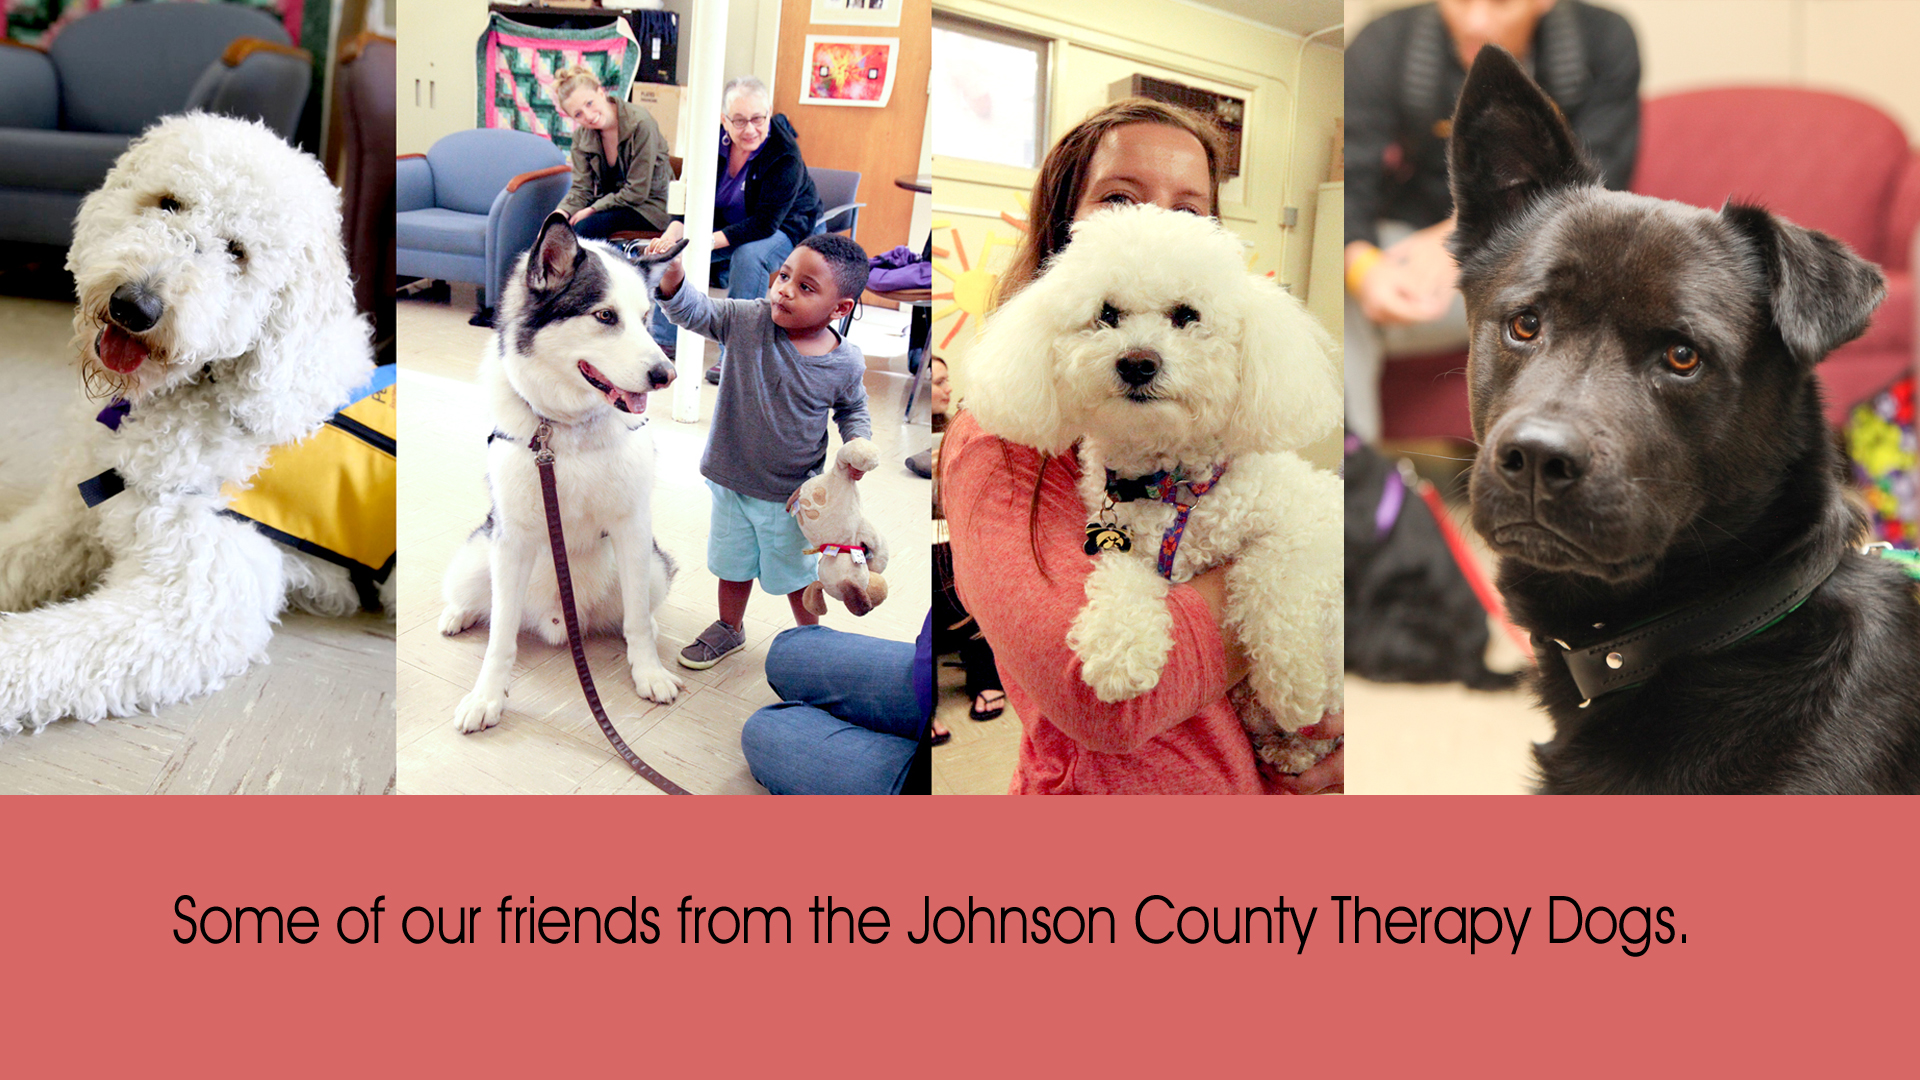 Therapy Dogs of Johnson County visit WRAC